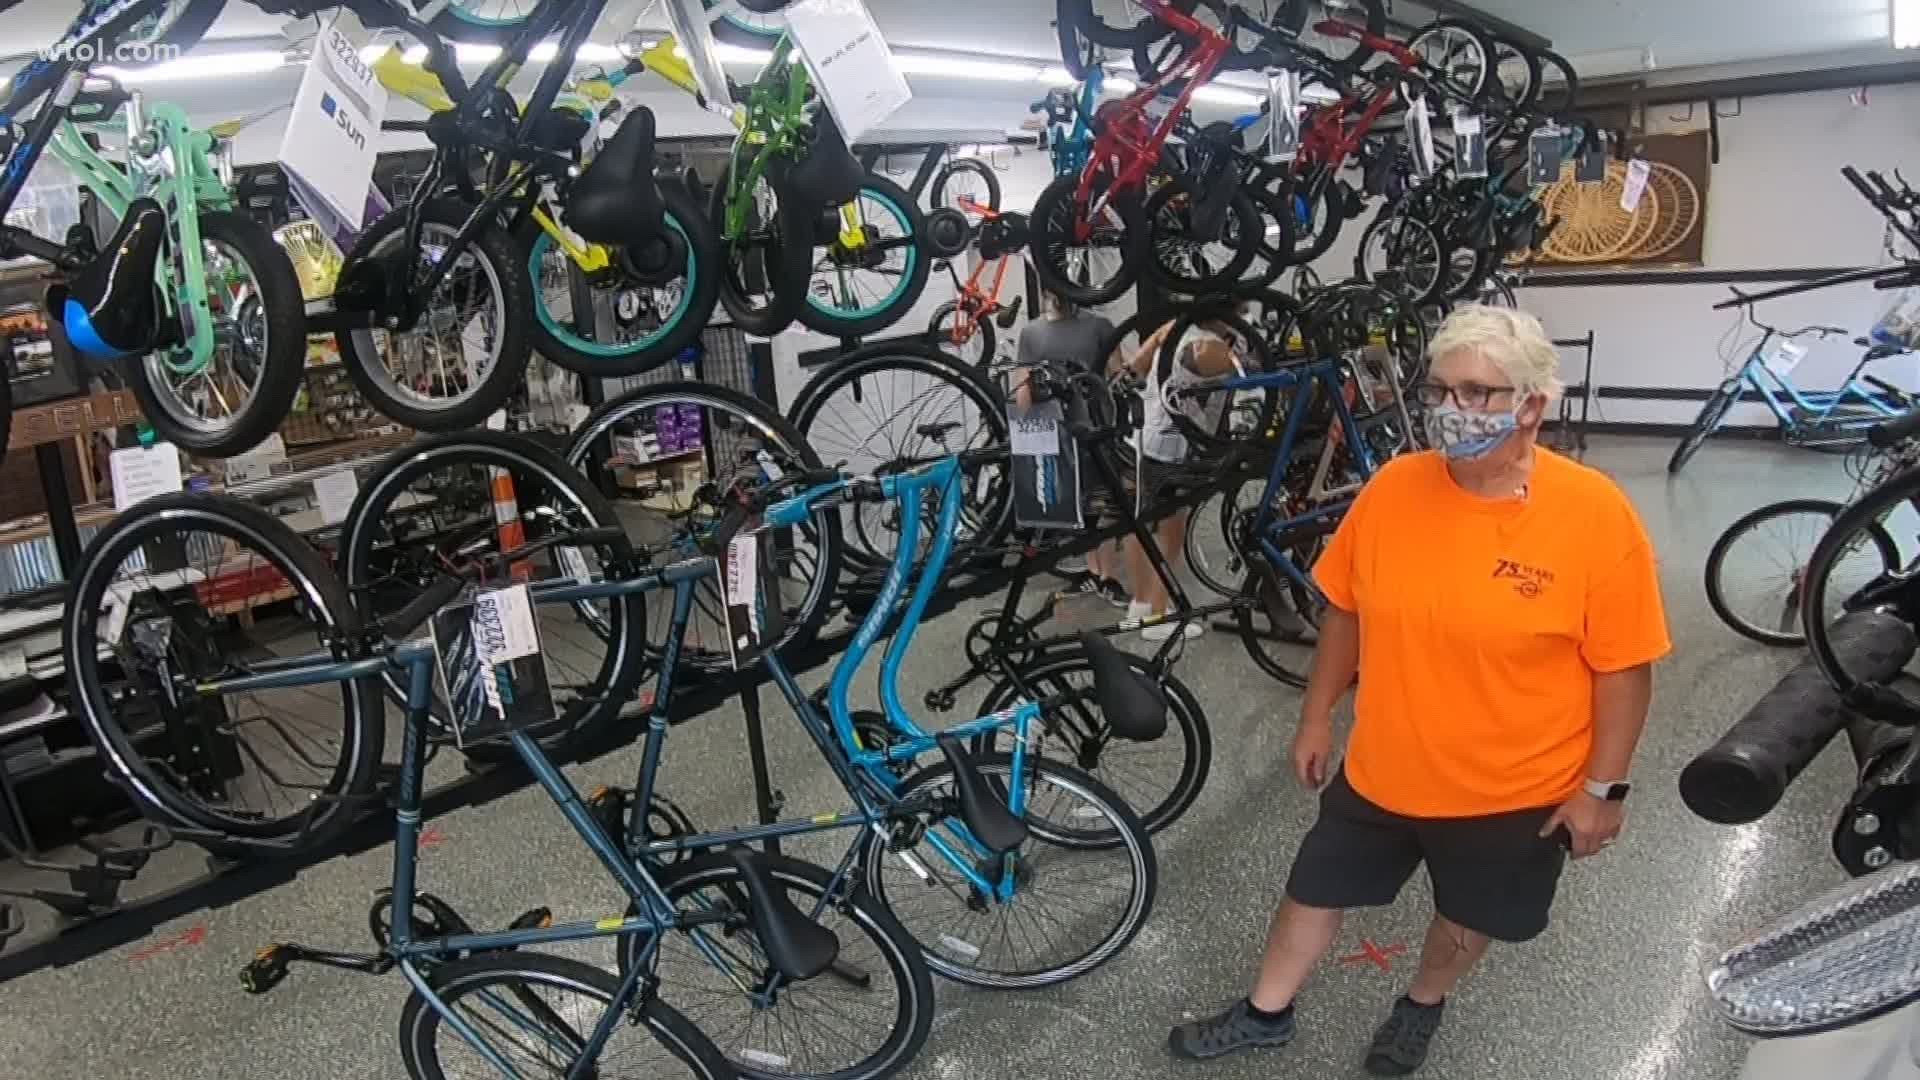 With a desire to get outside, many have turned to biking for exercise and fresh air. Meanwhile, local bike shops are trying to keep up with the renewed demand.